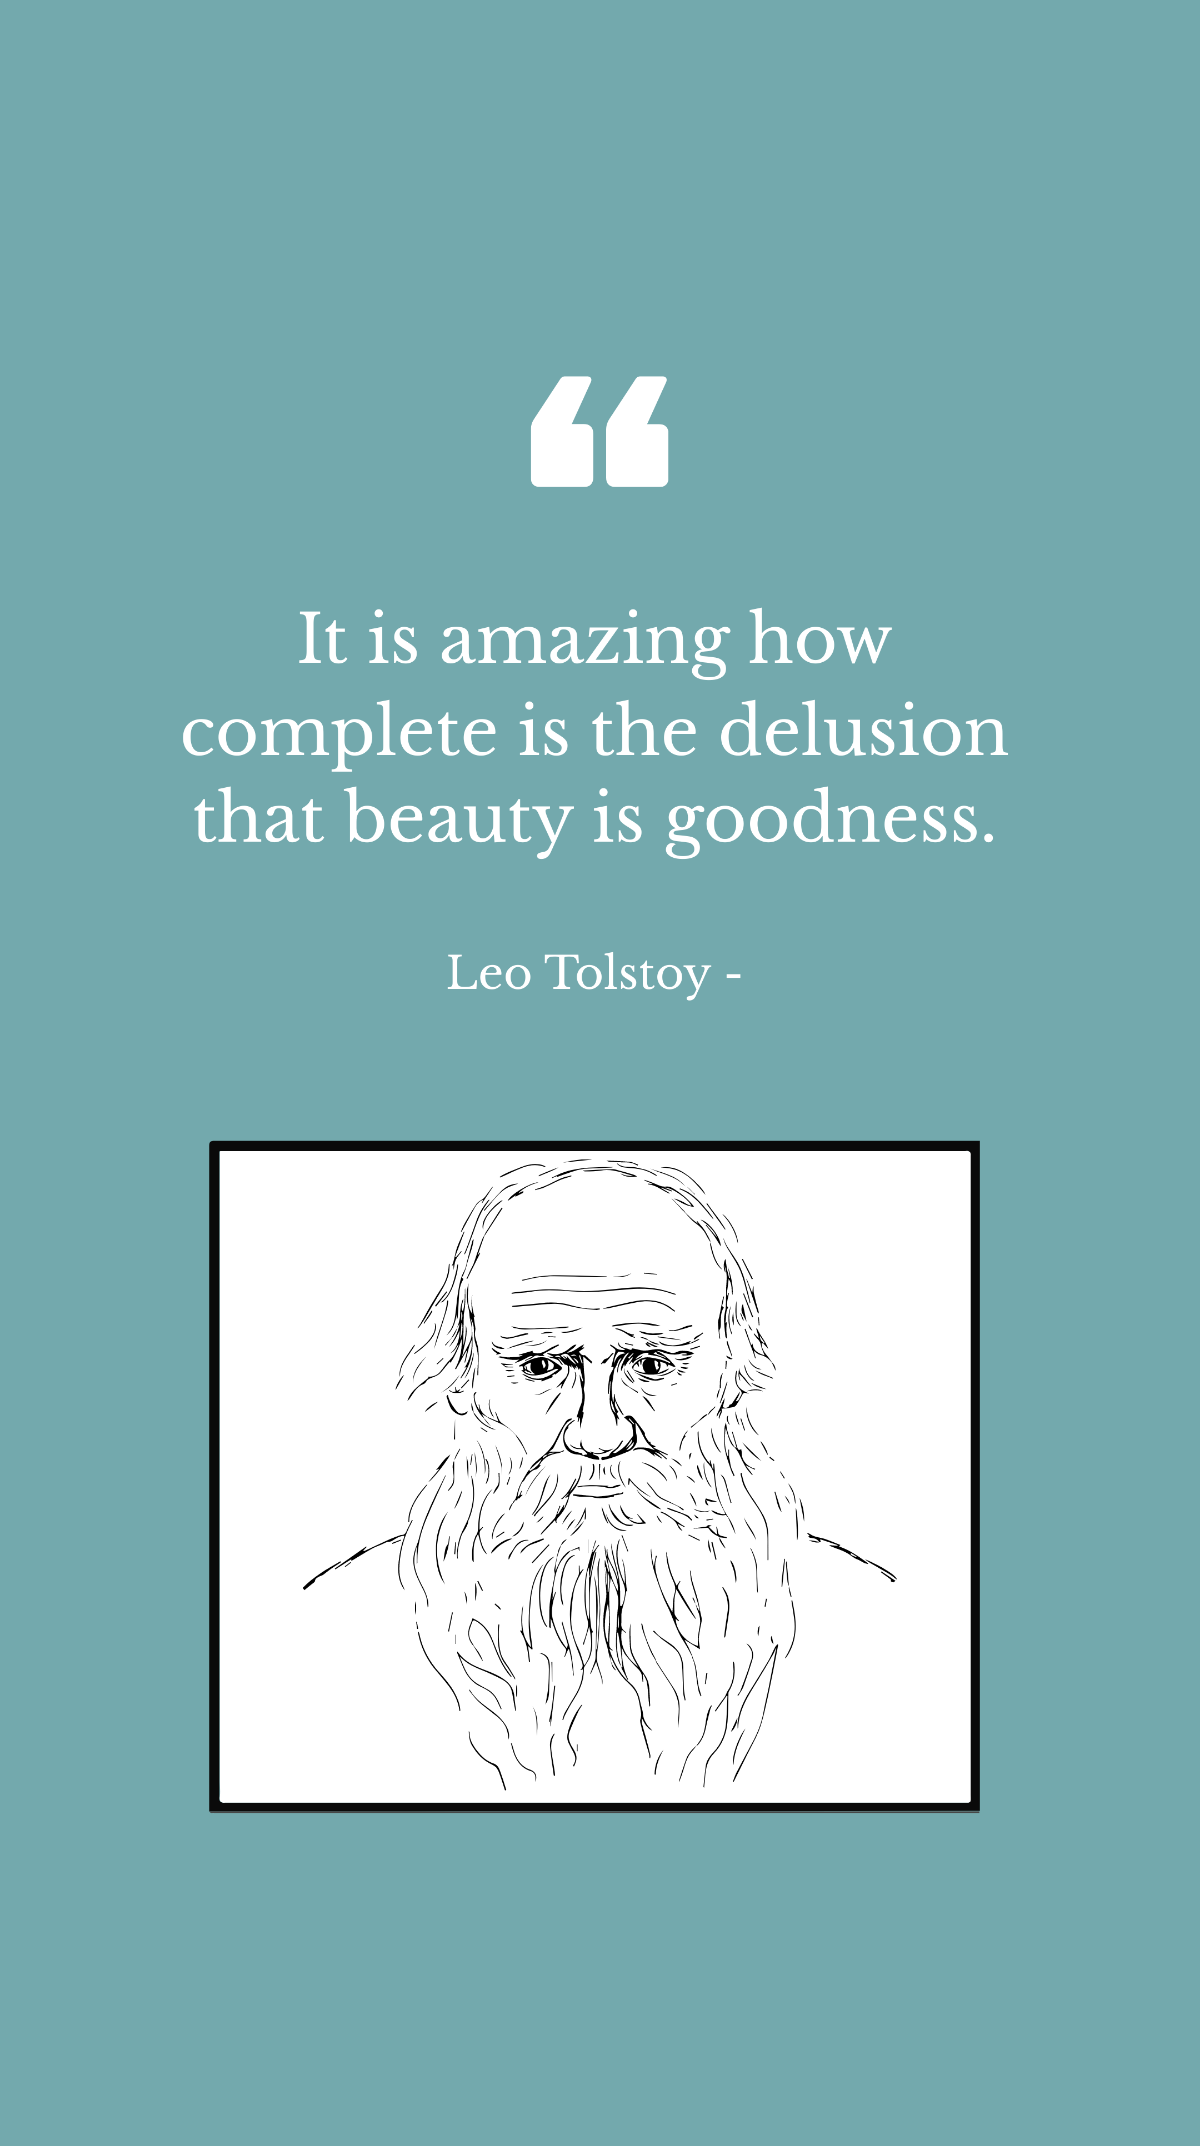 Leo Tolstoy - It is amazing how complete is the delusion that beauty is goodness.